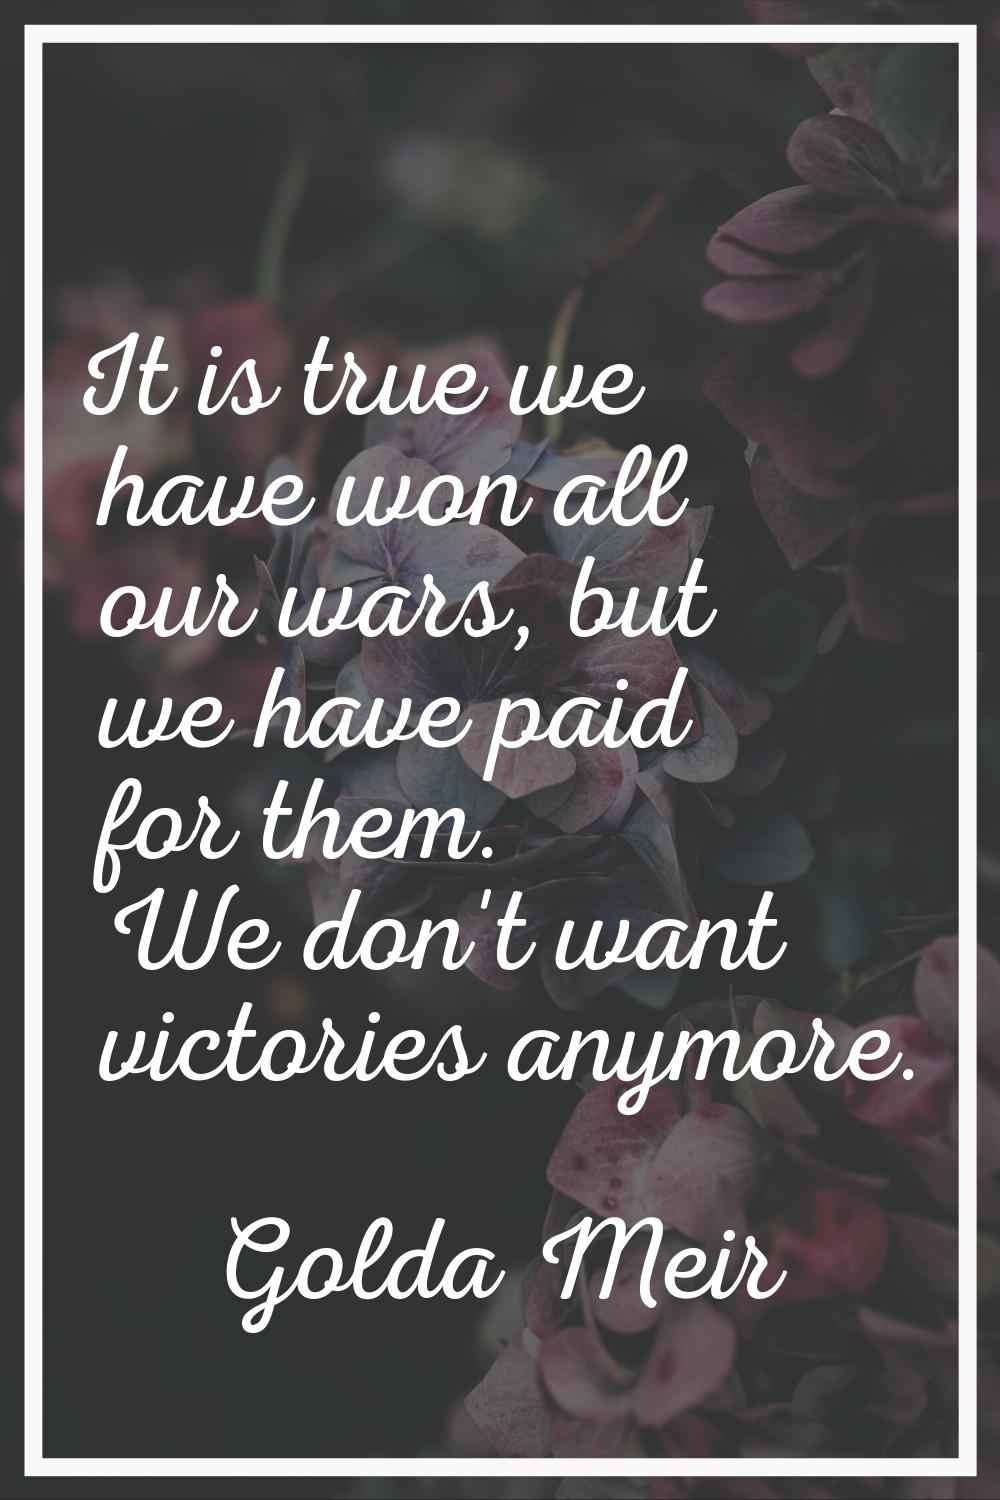 It is true we have won all our wars, but we have paid for them. We don't want victories anymore.